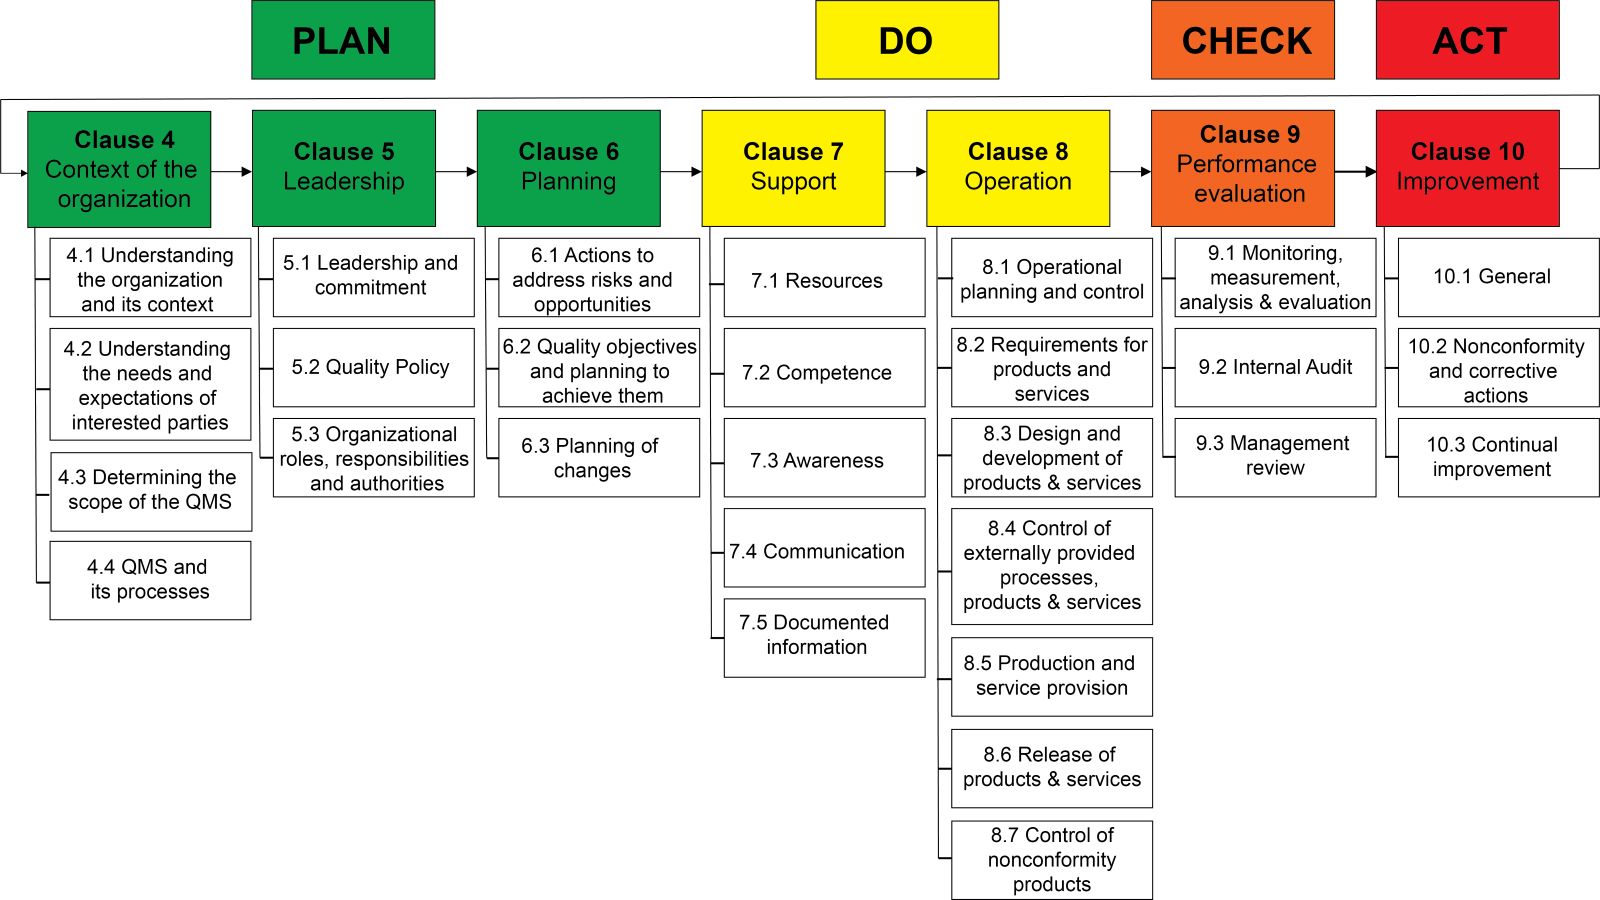 The clause structure of ISO 9001:2015